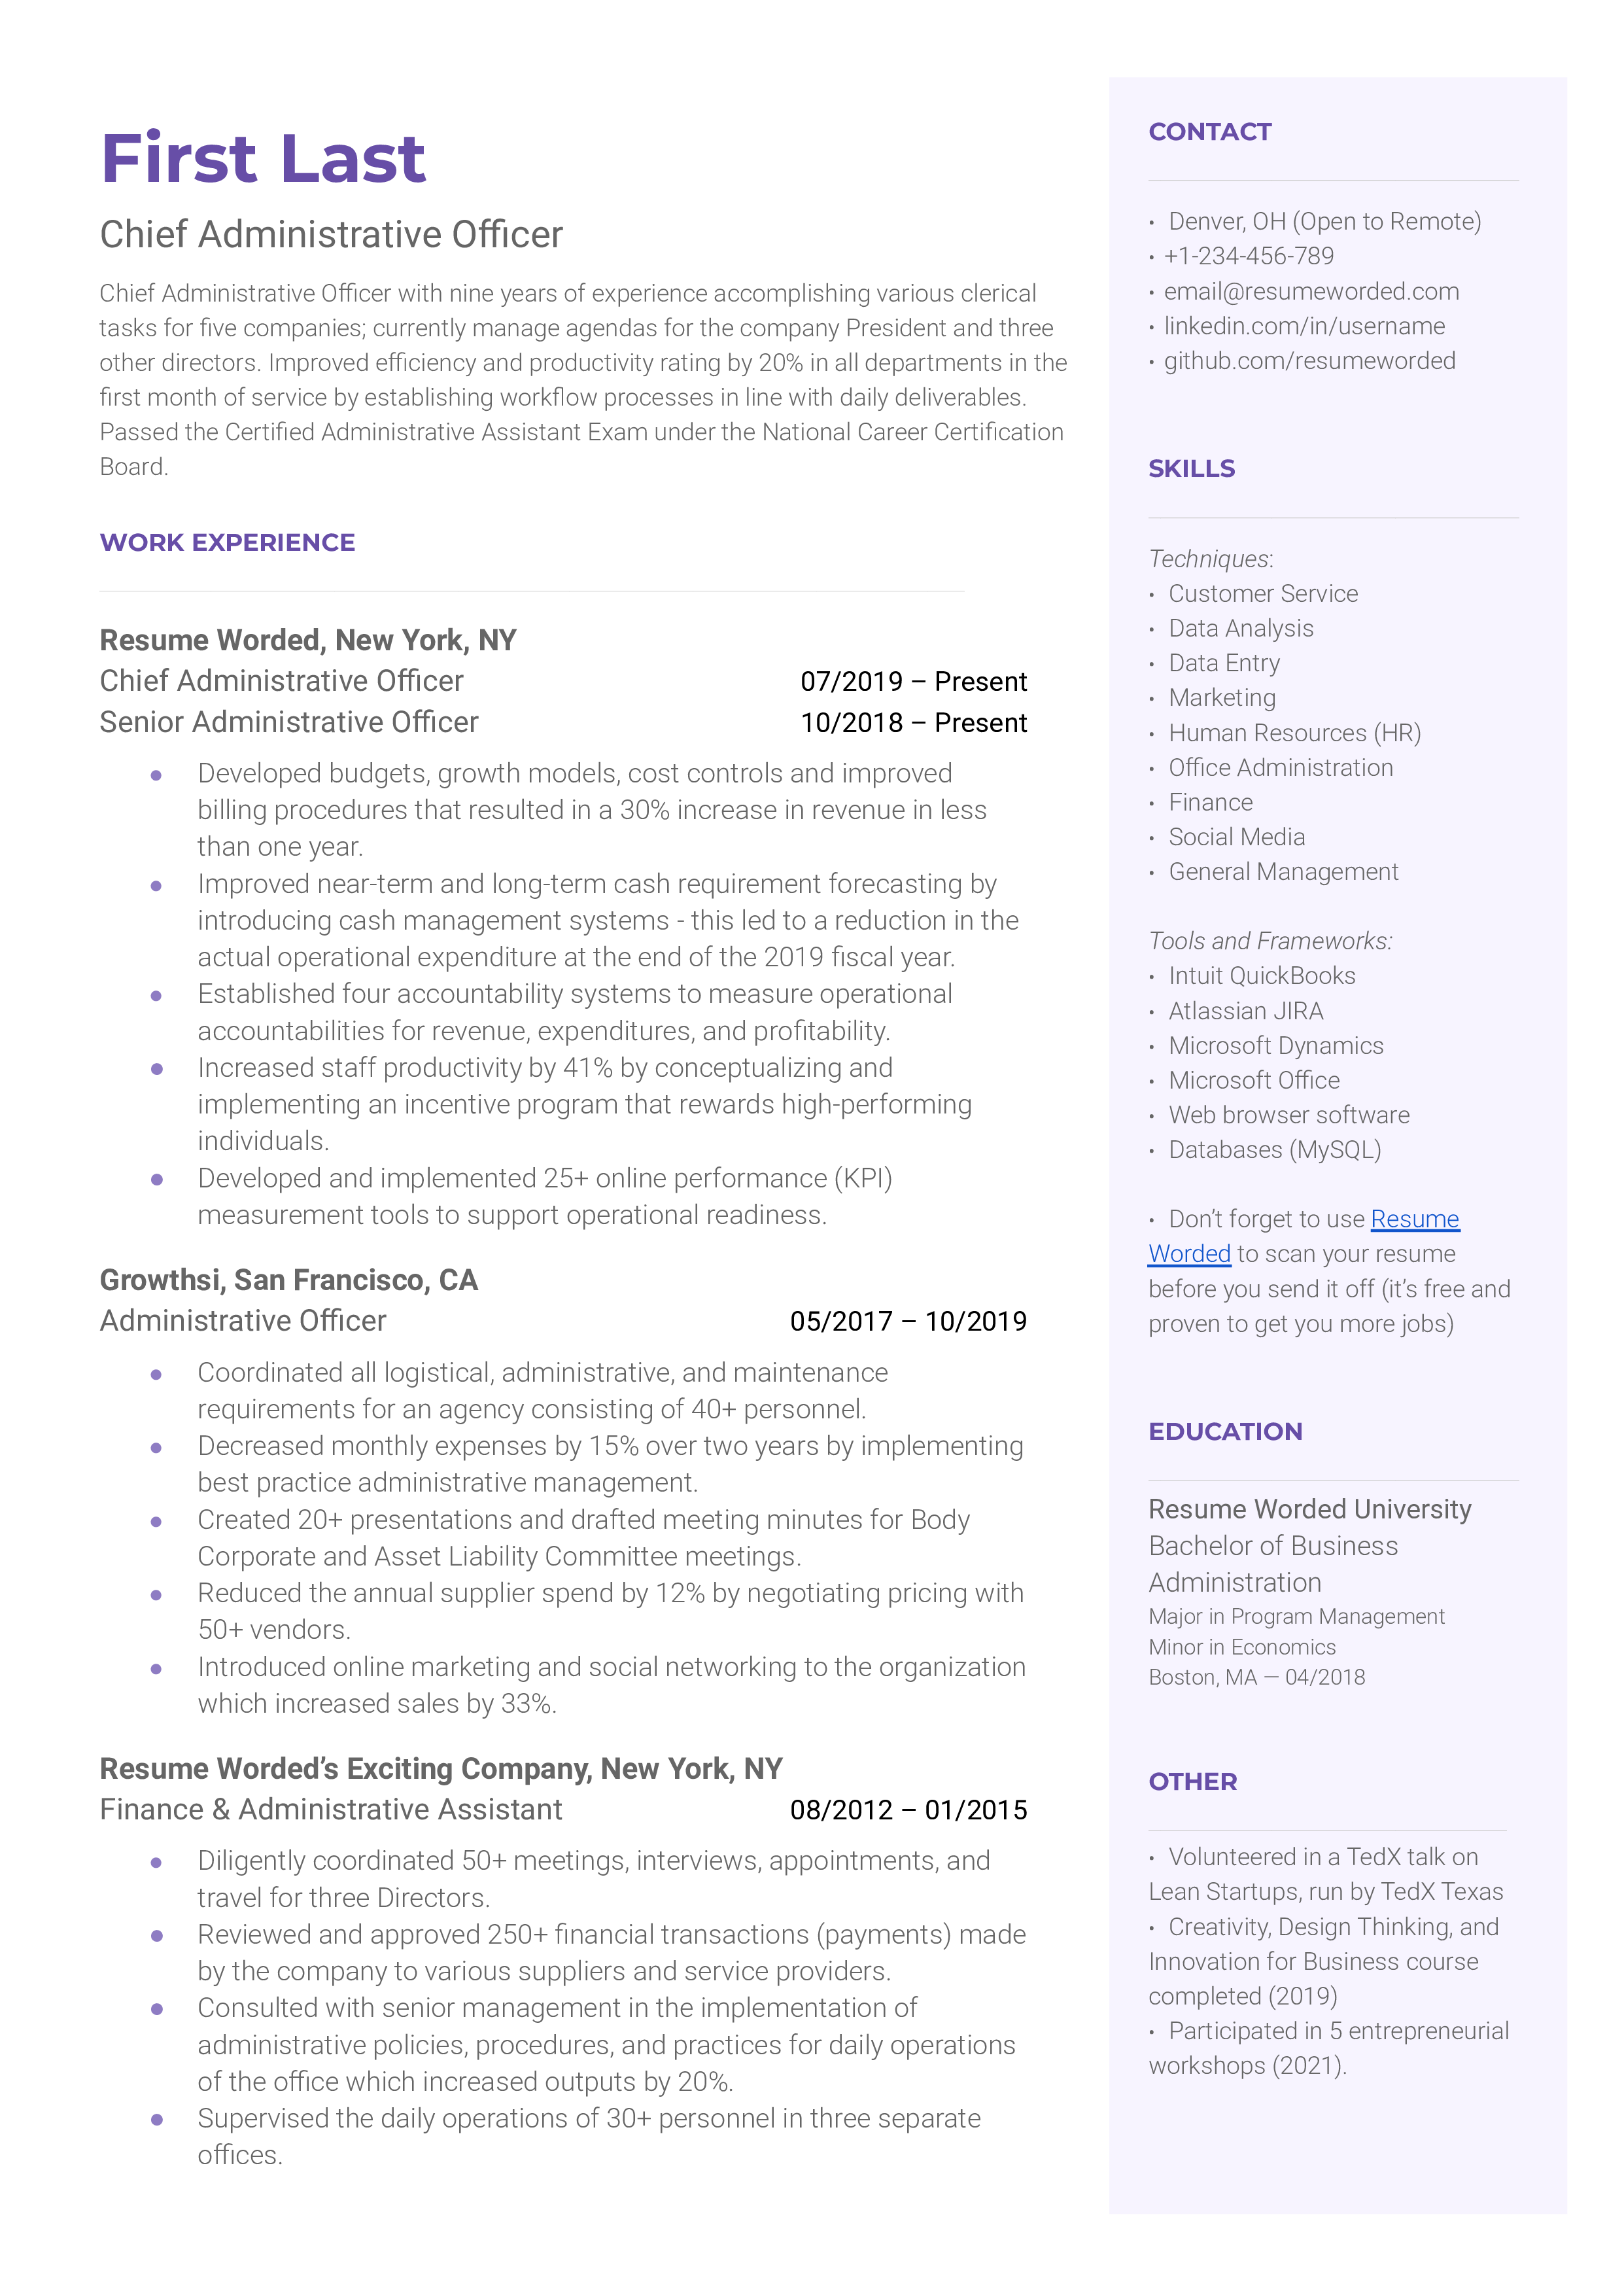 Chief Administrative Officer Resume Sample